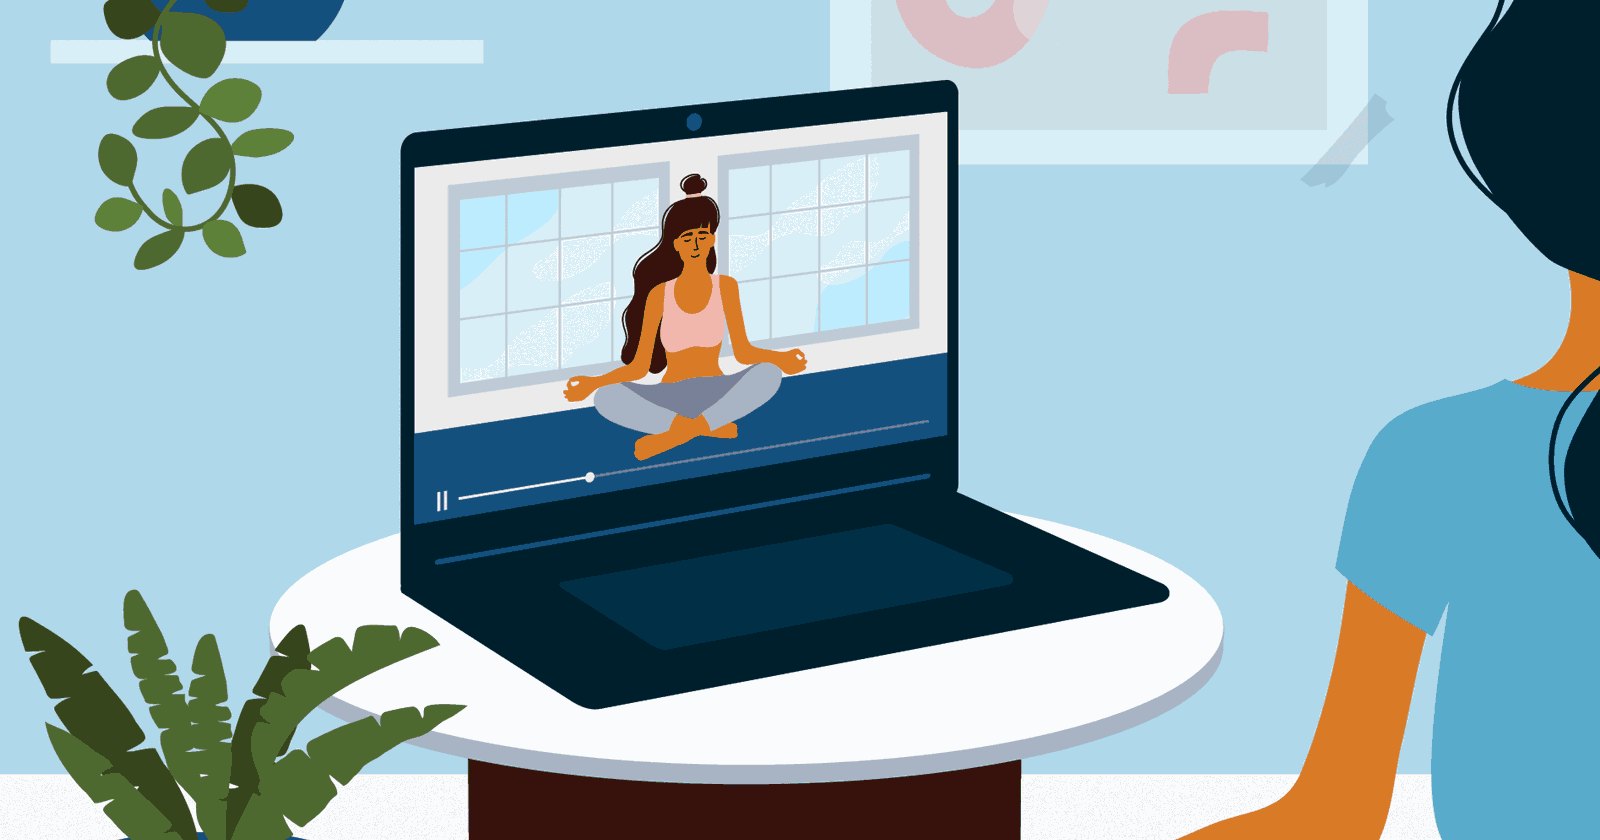 Image of an online yoga class on a laptop